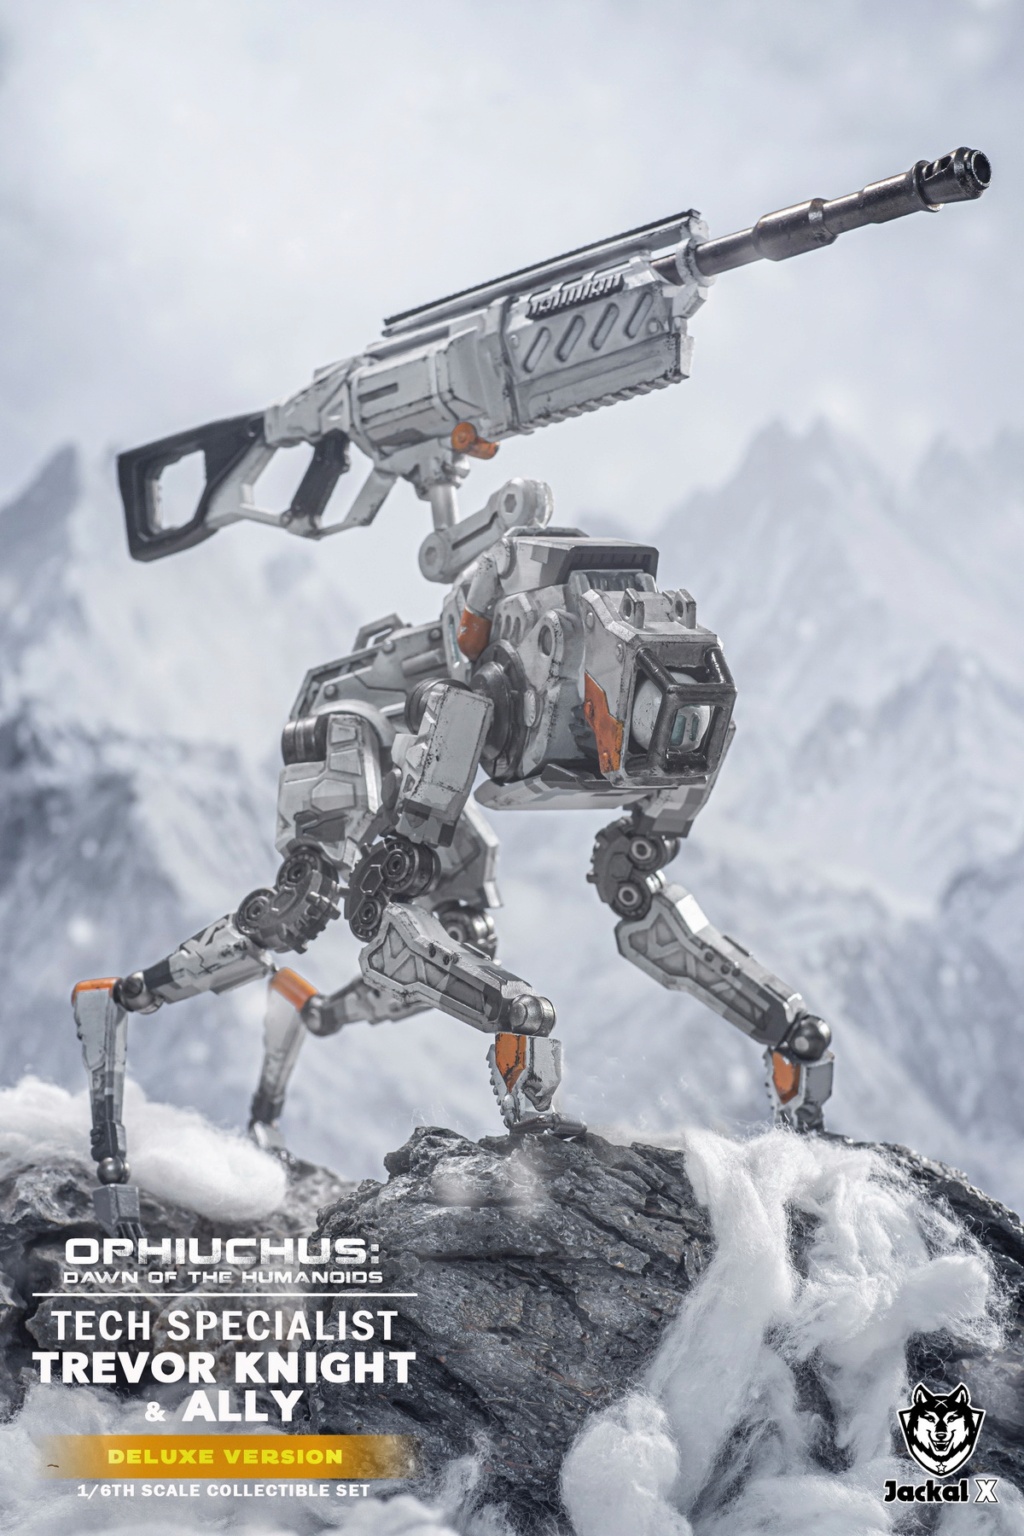 TrevorKnight - NEW PRODUCT: JackalX: JX014 1/6 Scale Tech Specialist Trevor Knight & Ally action figures 17064811